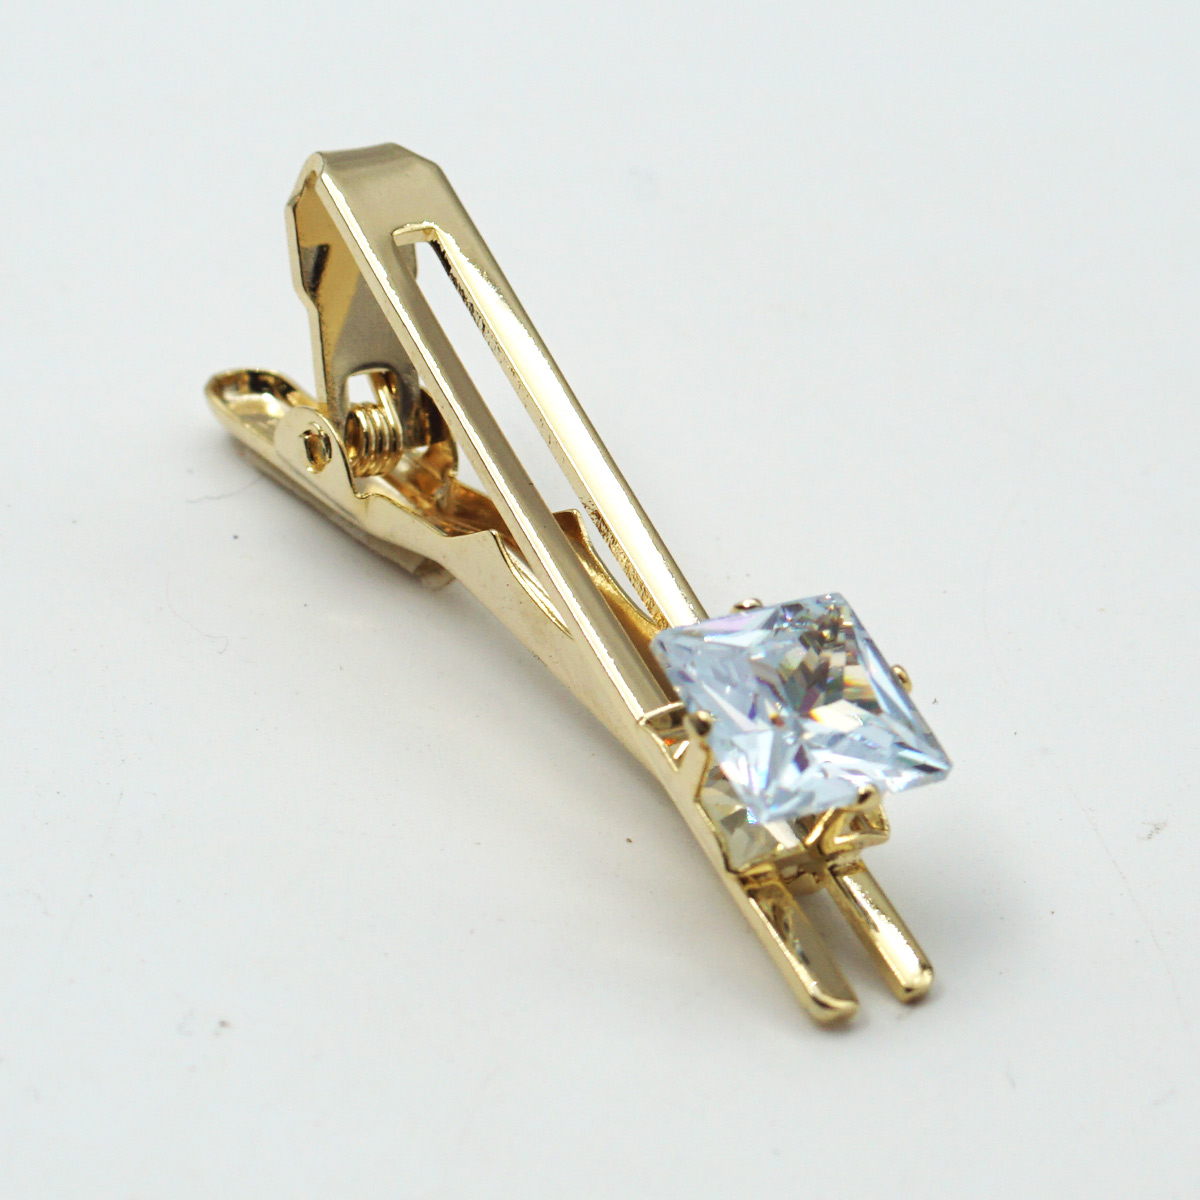 penhouse.in Gold Color With Square Shape Stone Tie Pin SKU 87312